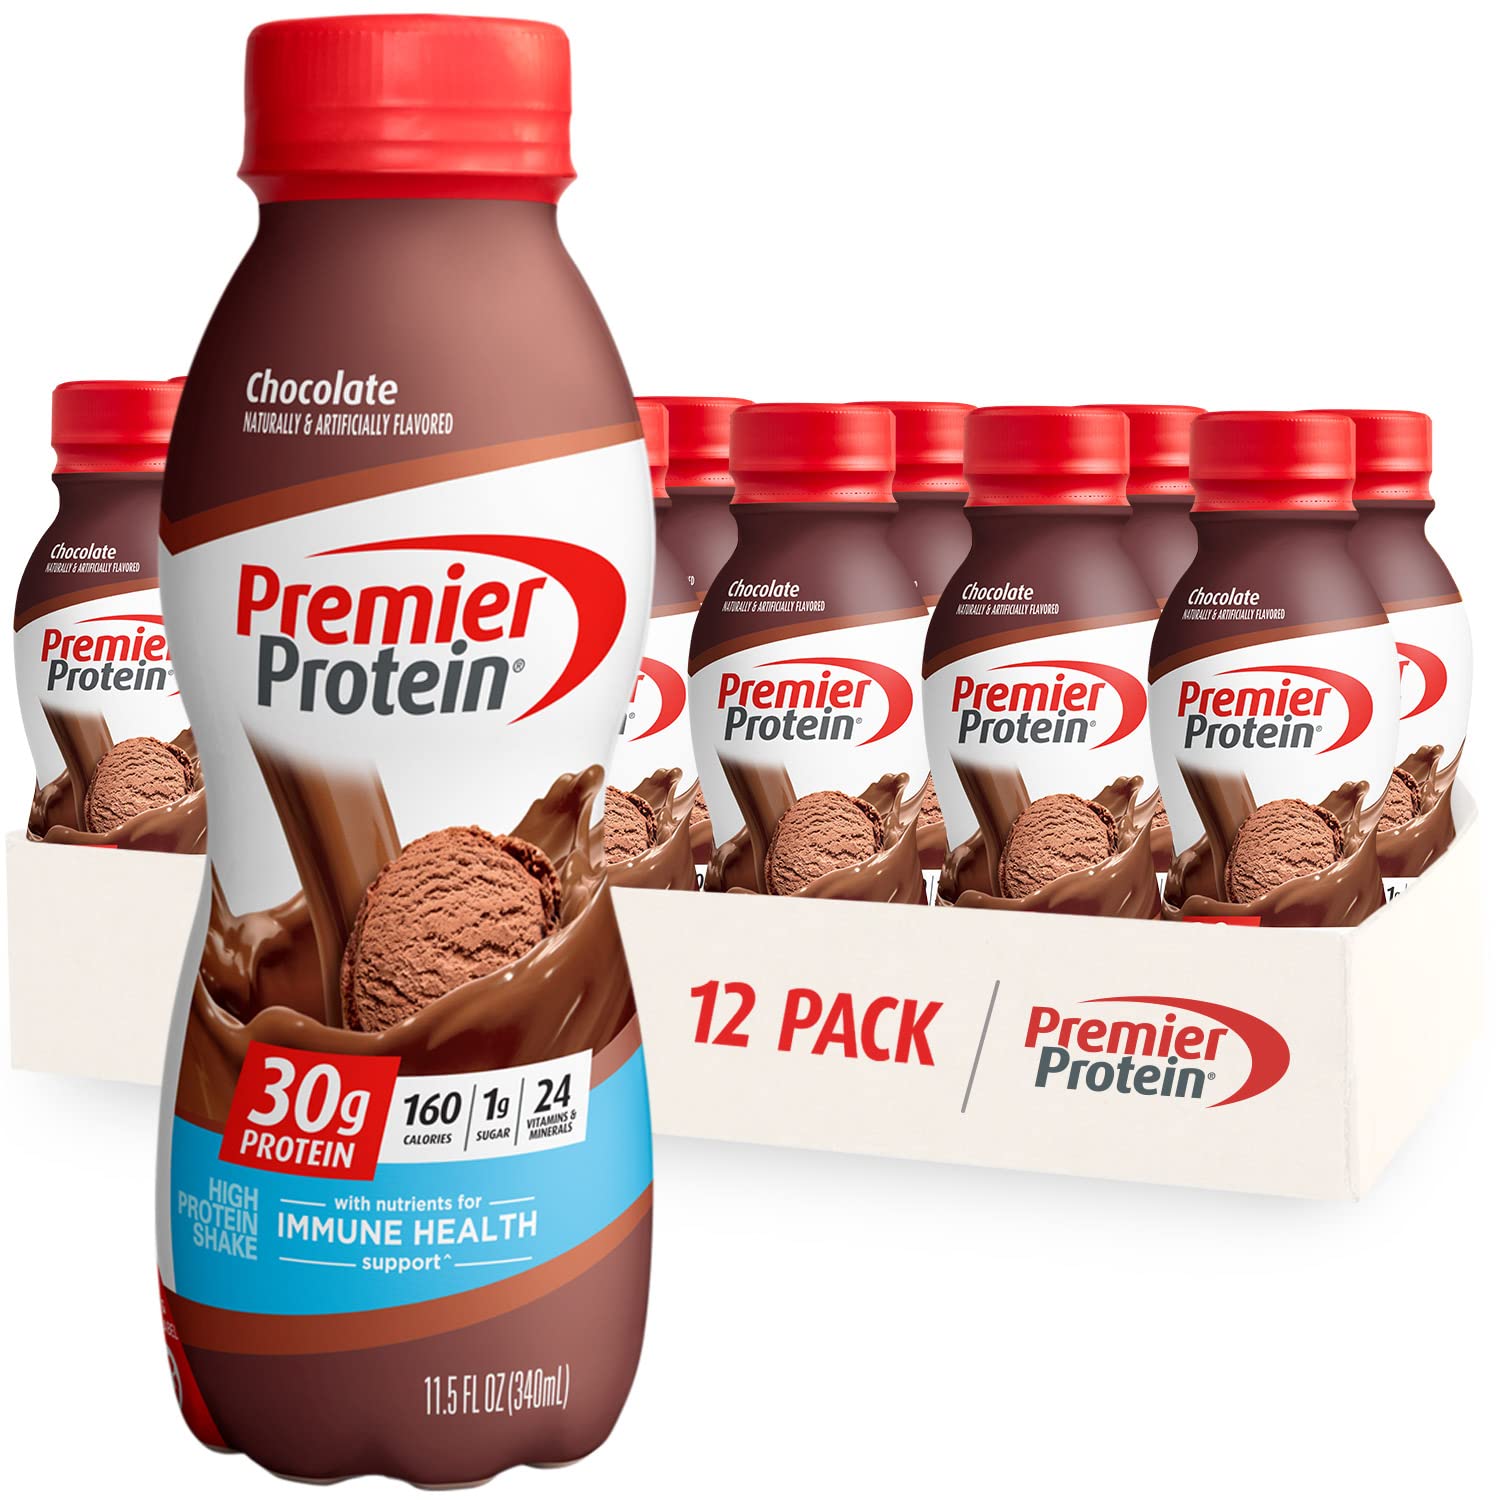 Premium shakes example that you can buy with EBT